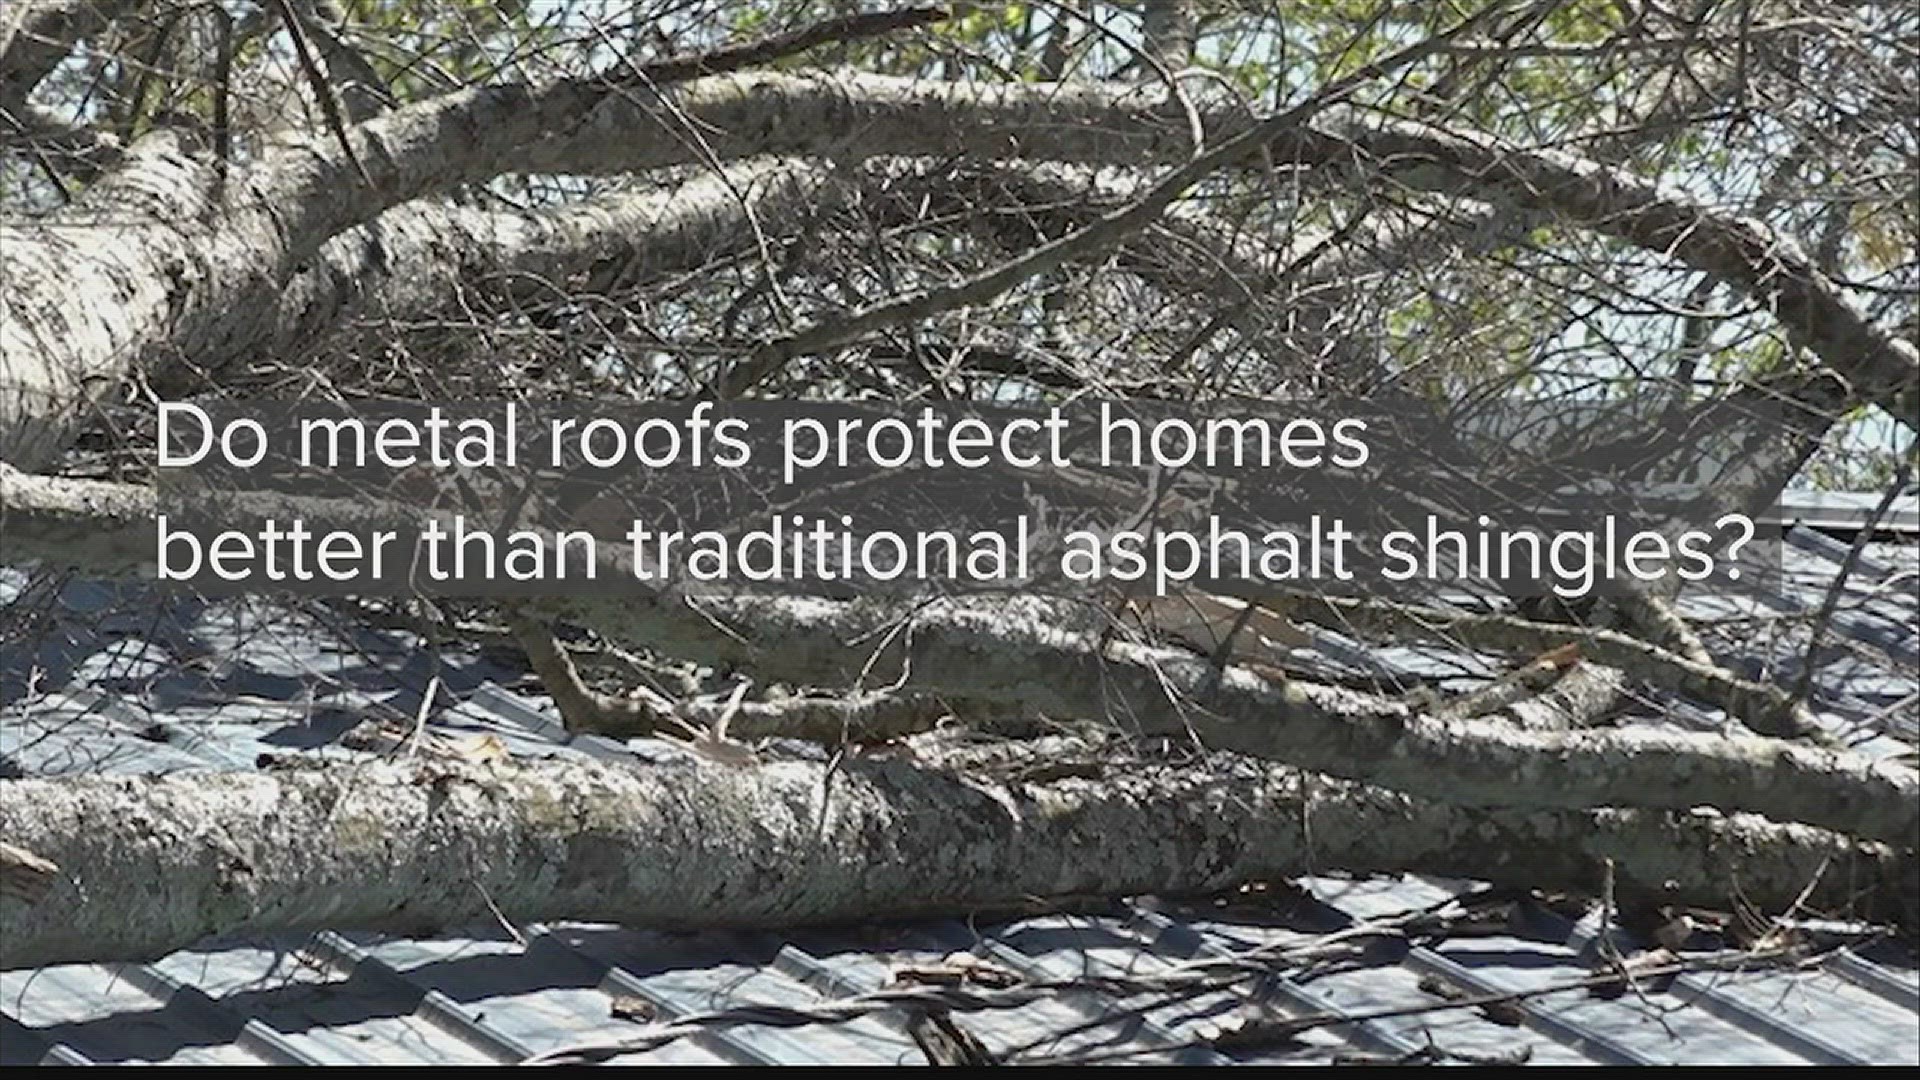 Roofing experts say in most cases metal roofs can protect your home better against the elements - it depends on several other factors.